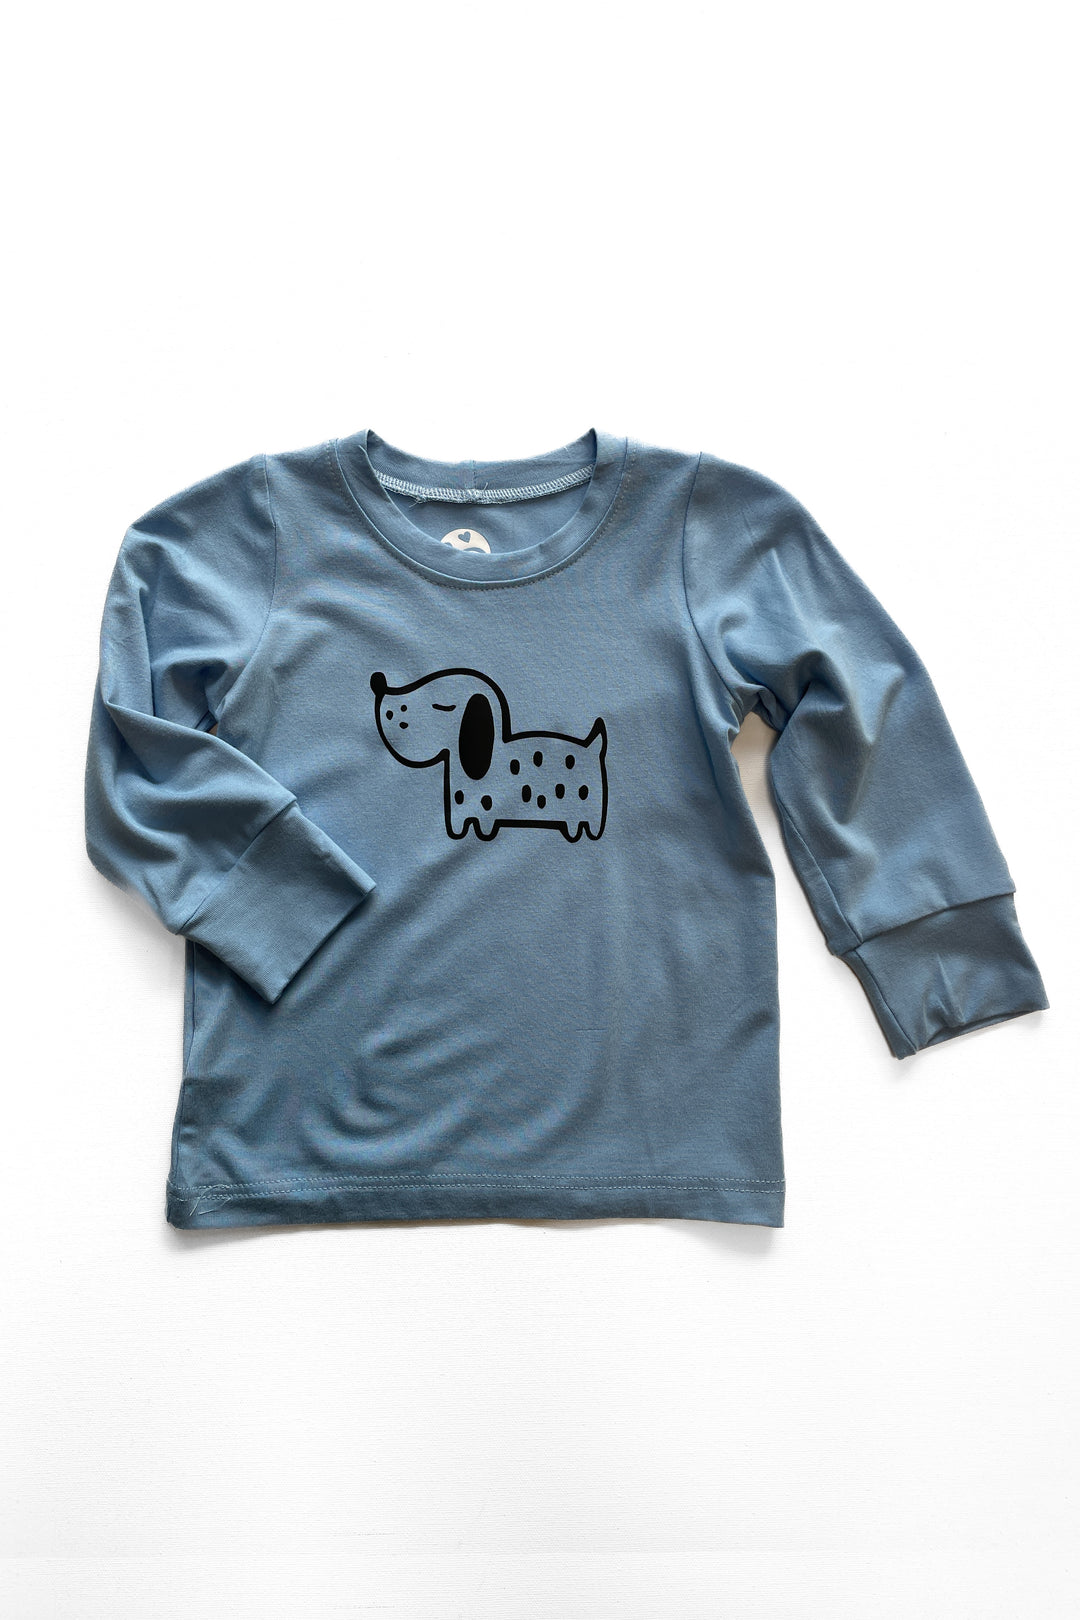 Maxime sweater for baby - Louis the Dog